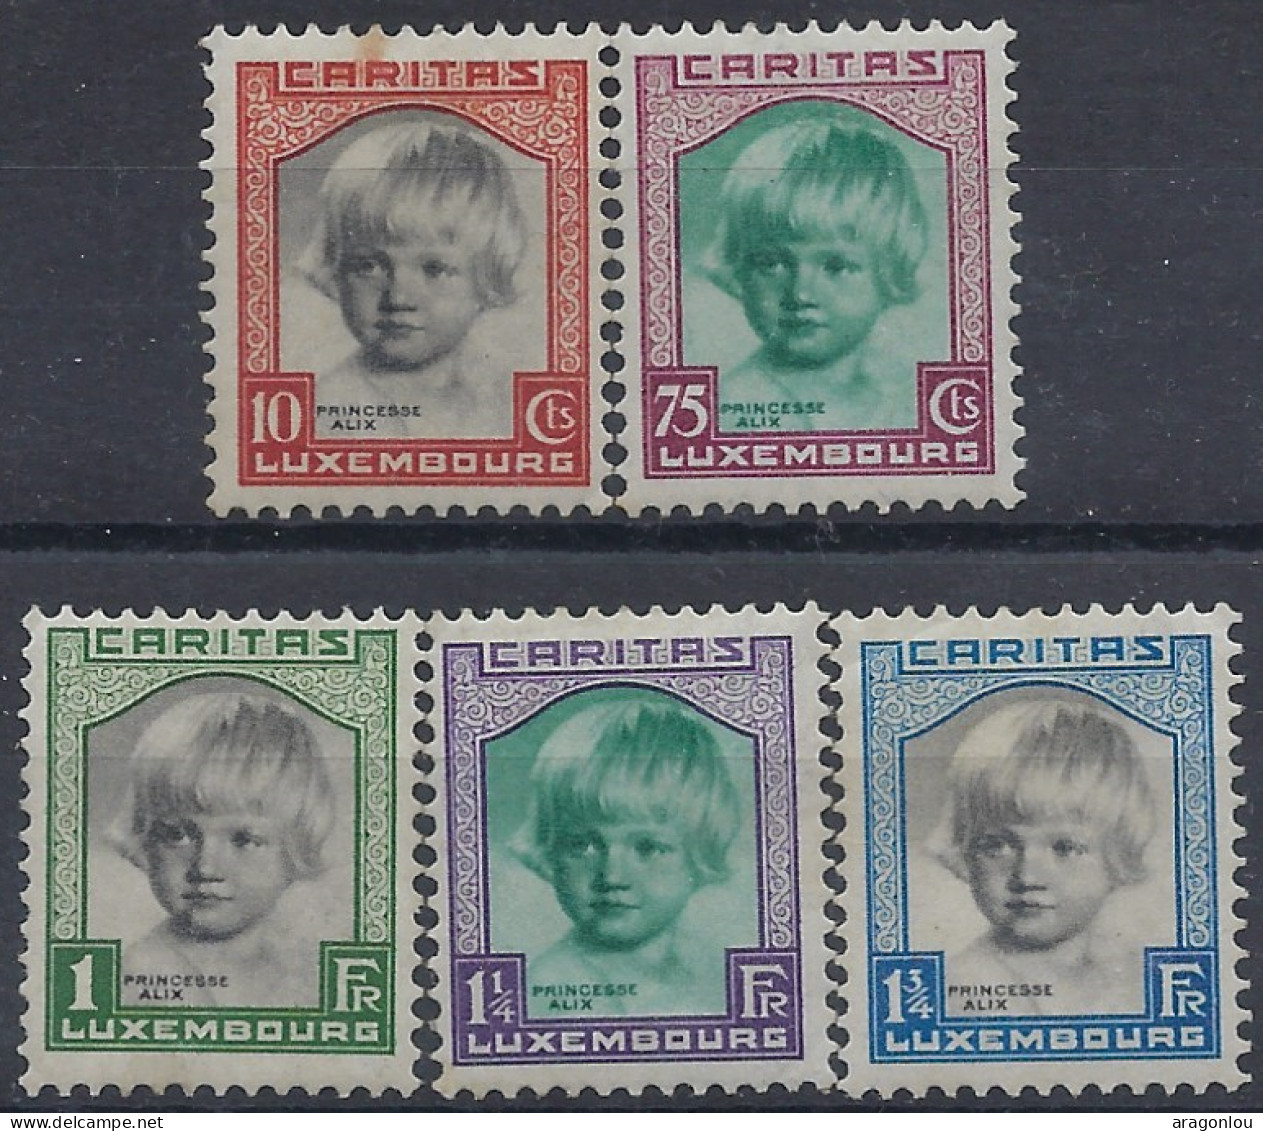 Luxembourg - Luxemburg - Timbres  1931  Série    Princesse Alice    Caritas °   VC.100,- - Gebraucht